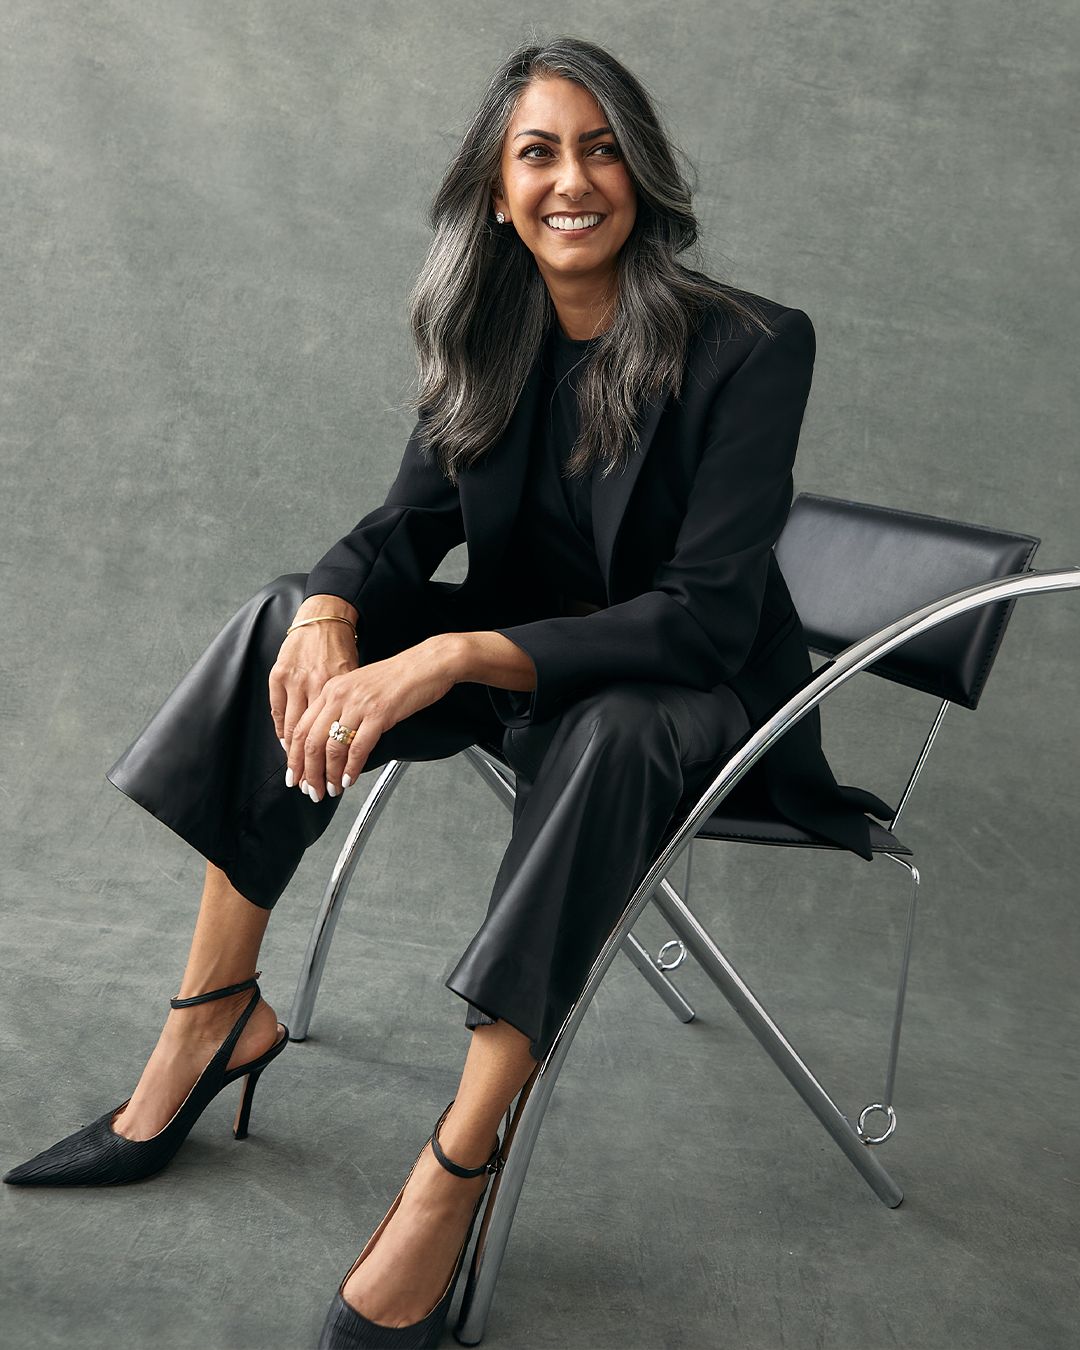 Shirley Chowdhary sitting in chair wearing Black Tailored Jacket and Black Leather Trousers